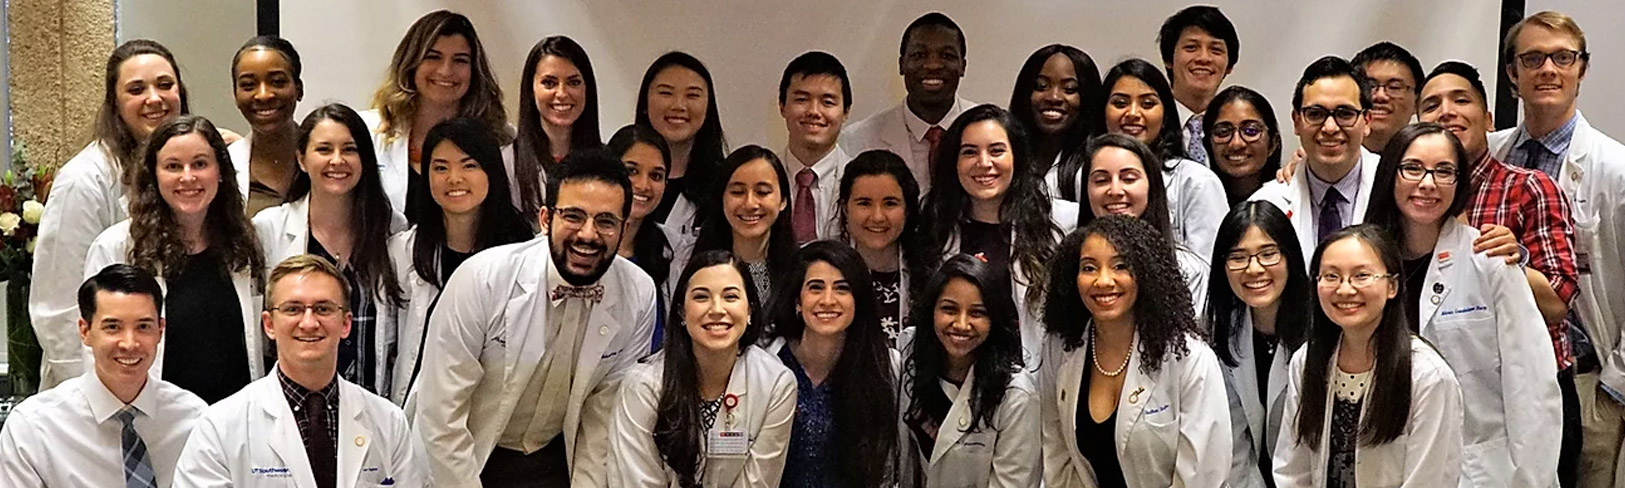 Group of young people in lab coats smiling, with Gold Humanism Honor Society written over them